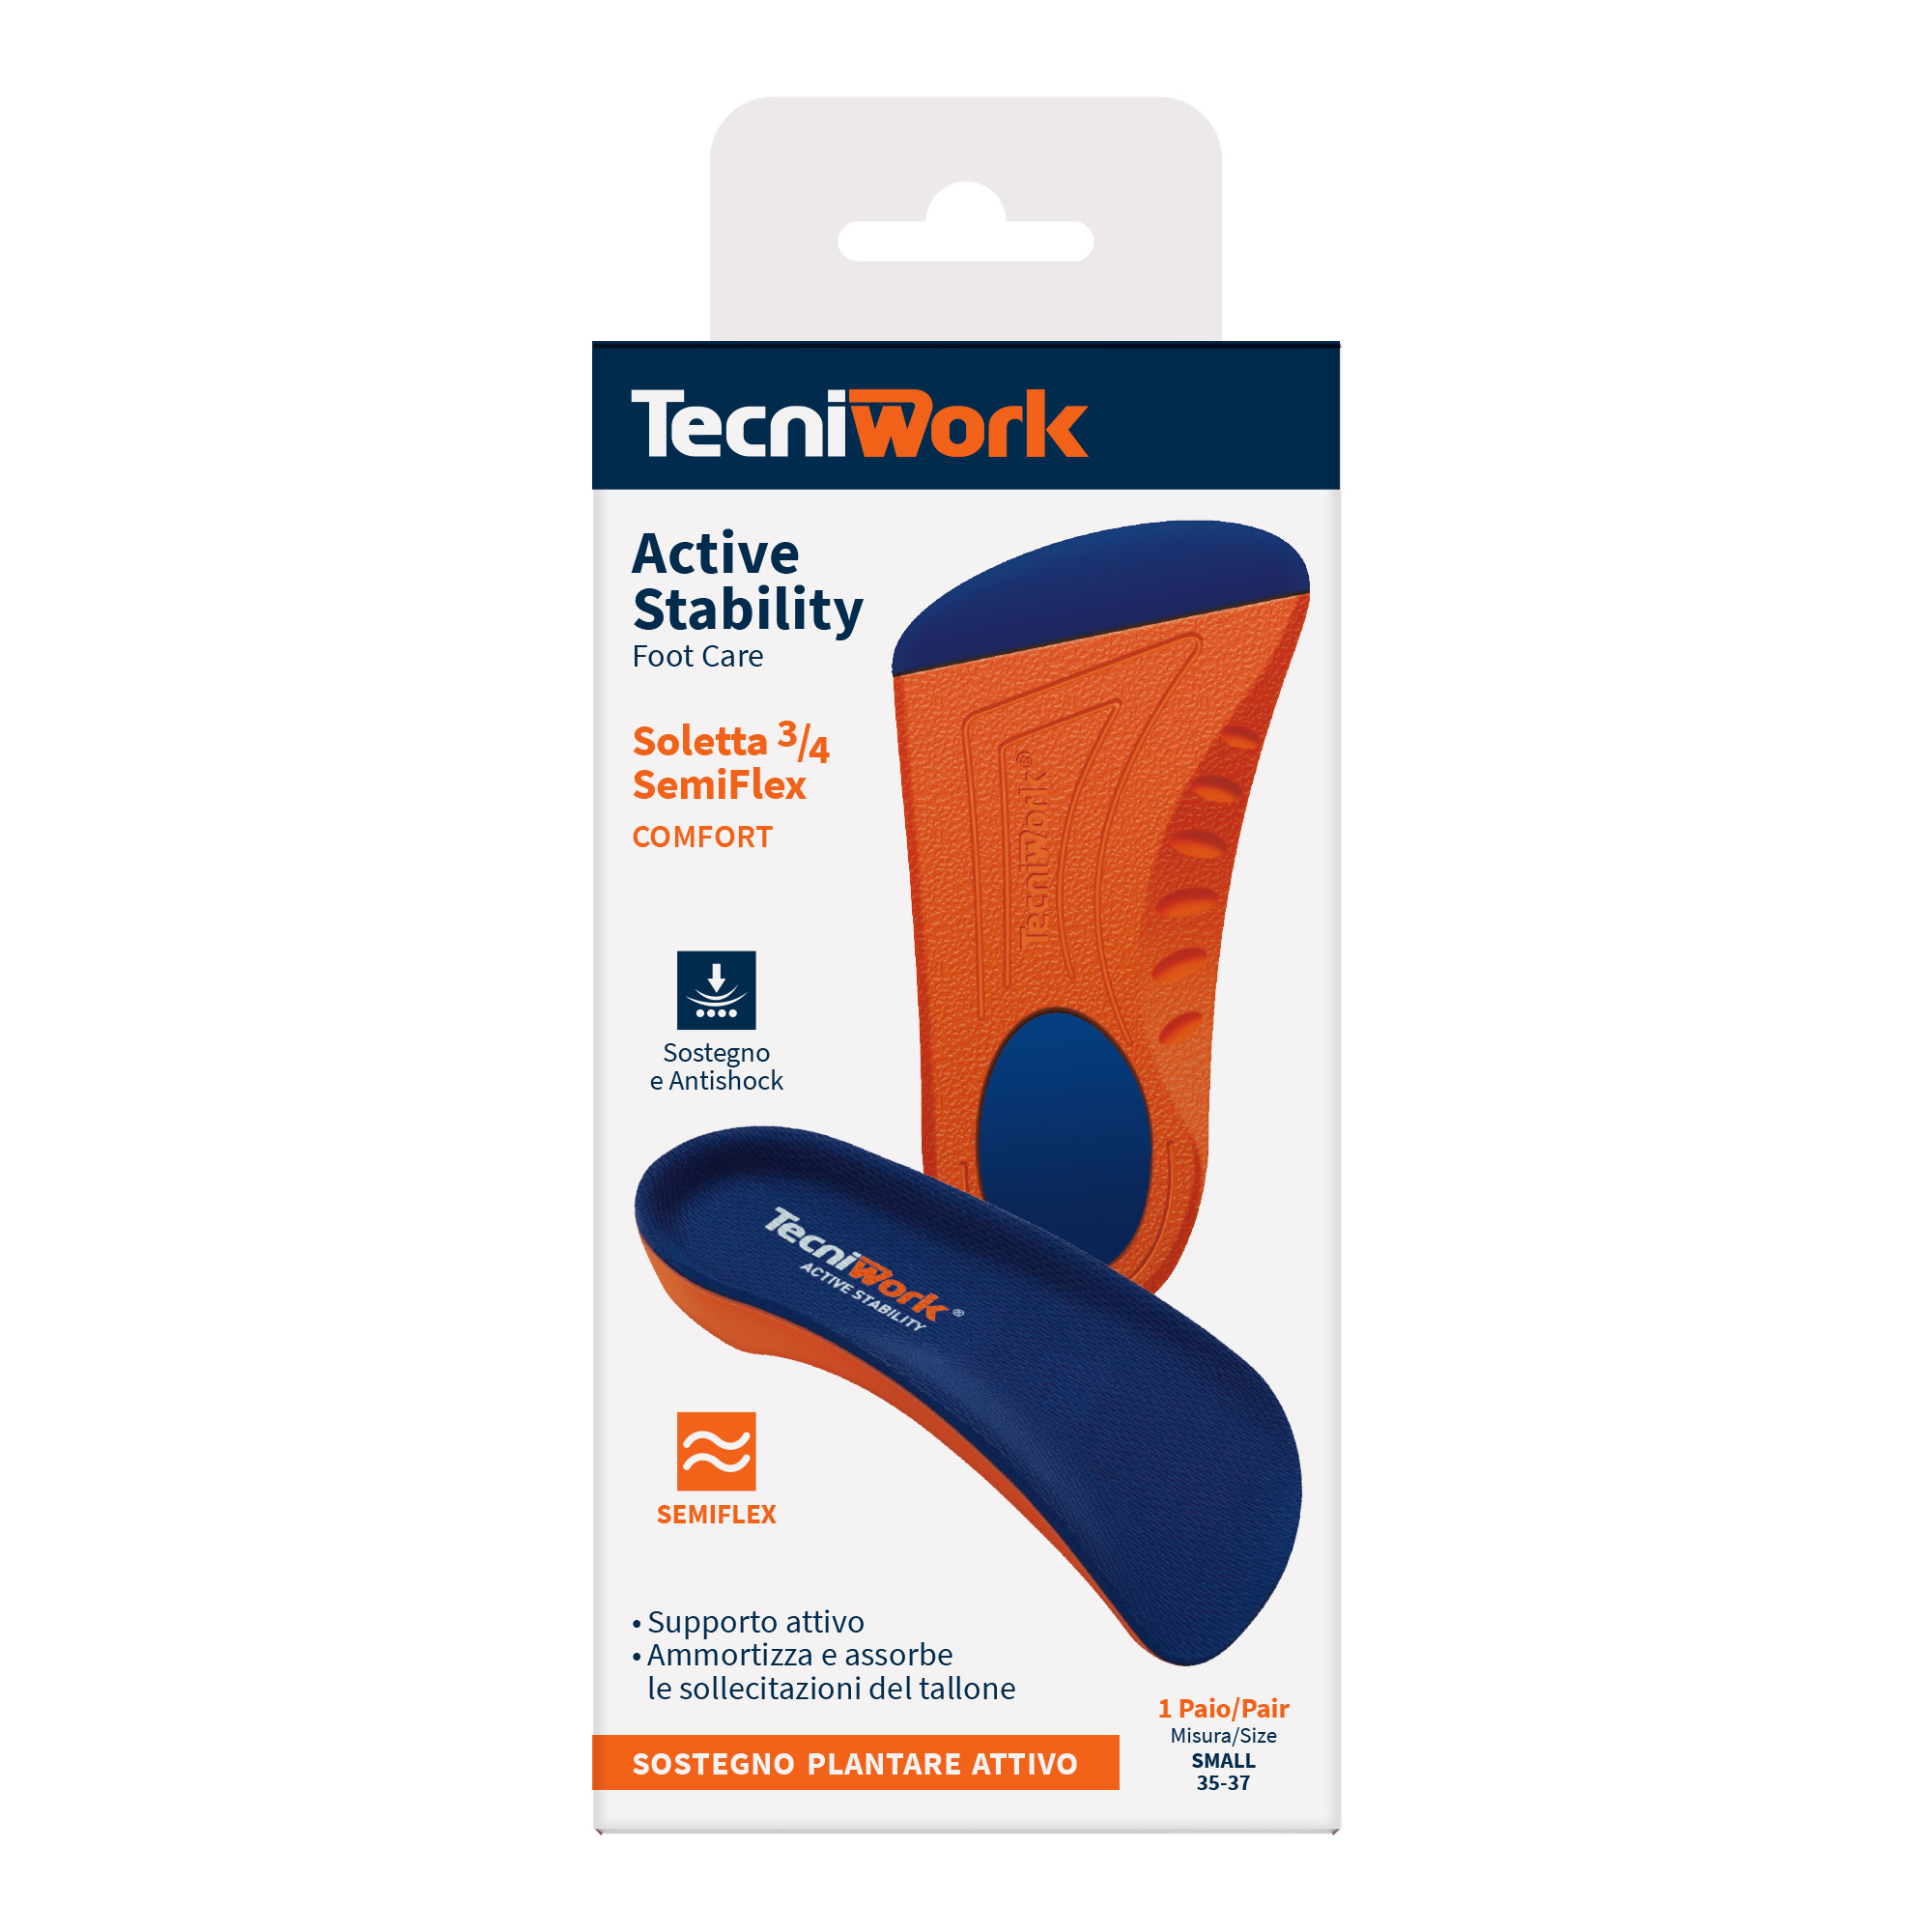 ¾ Semiflex insoles without insert